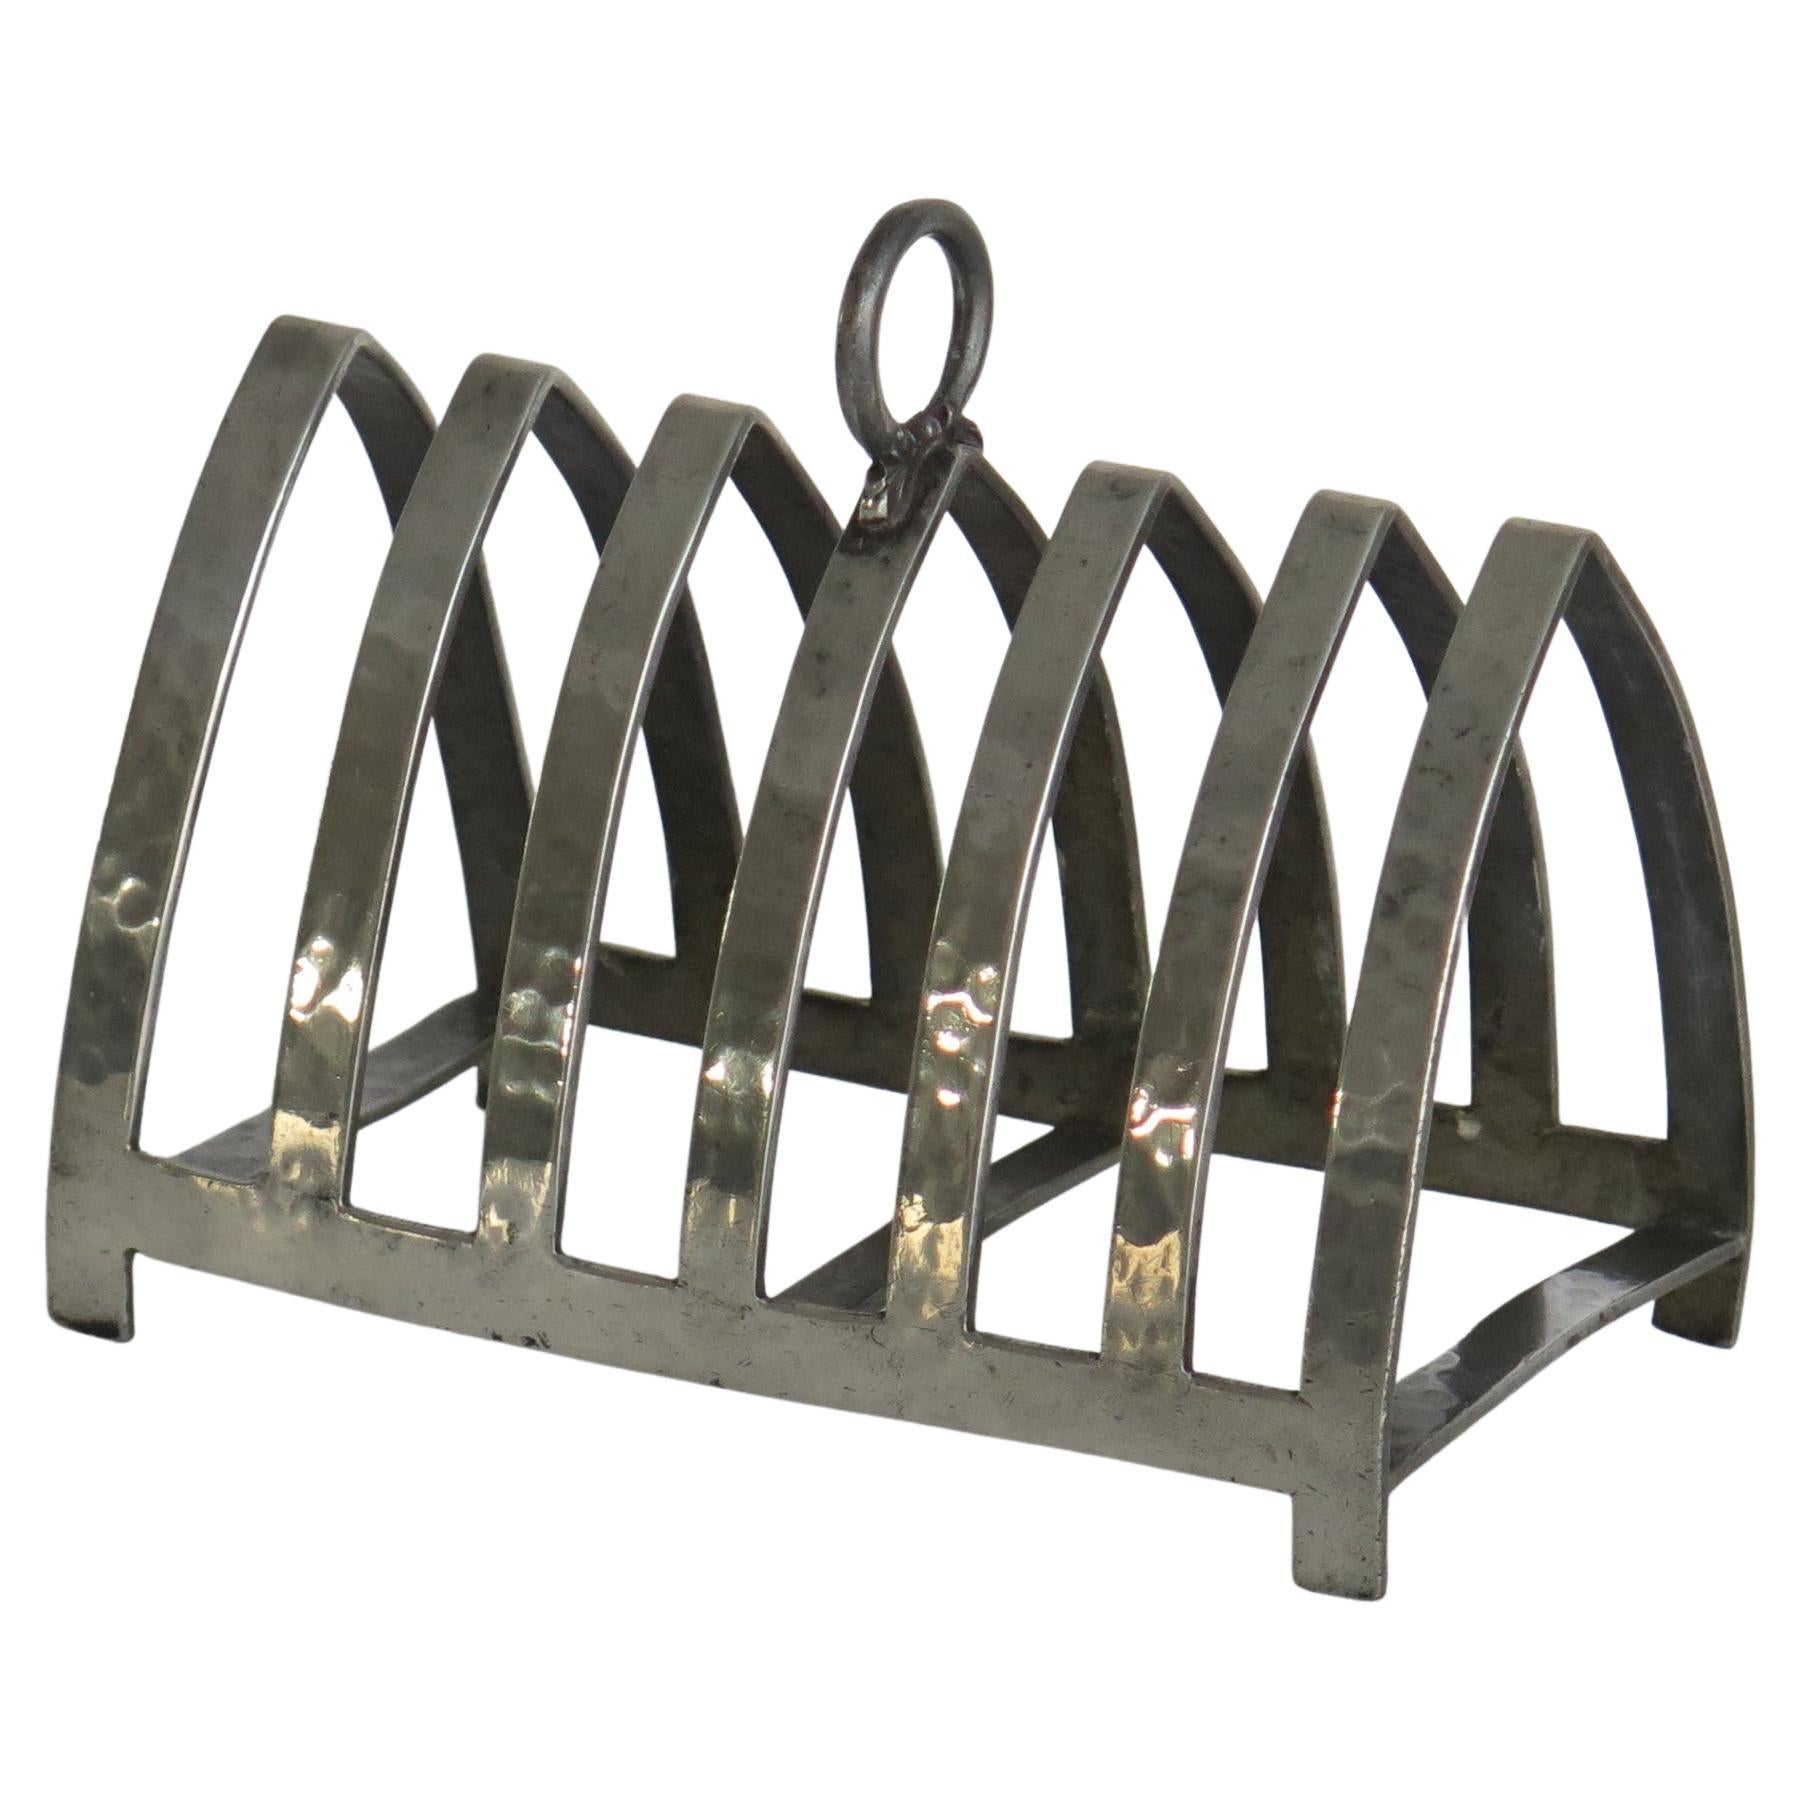 Art Deco Hammered Pewter Letter Rack by Connells of London, circa 1925 For Sale